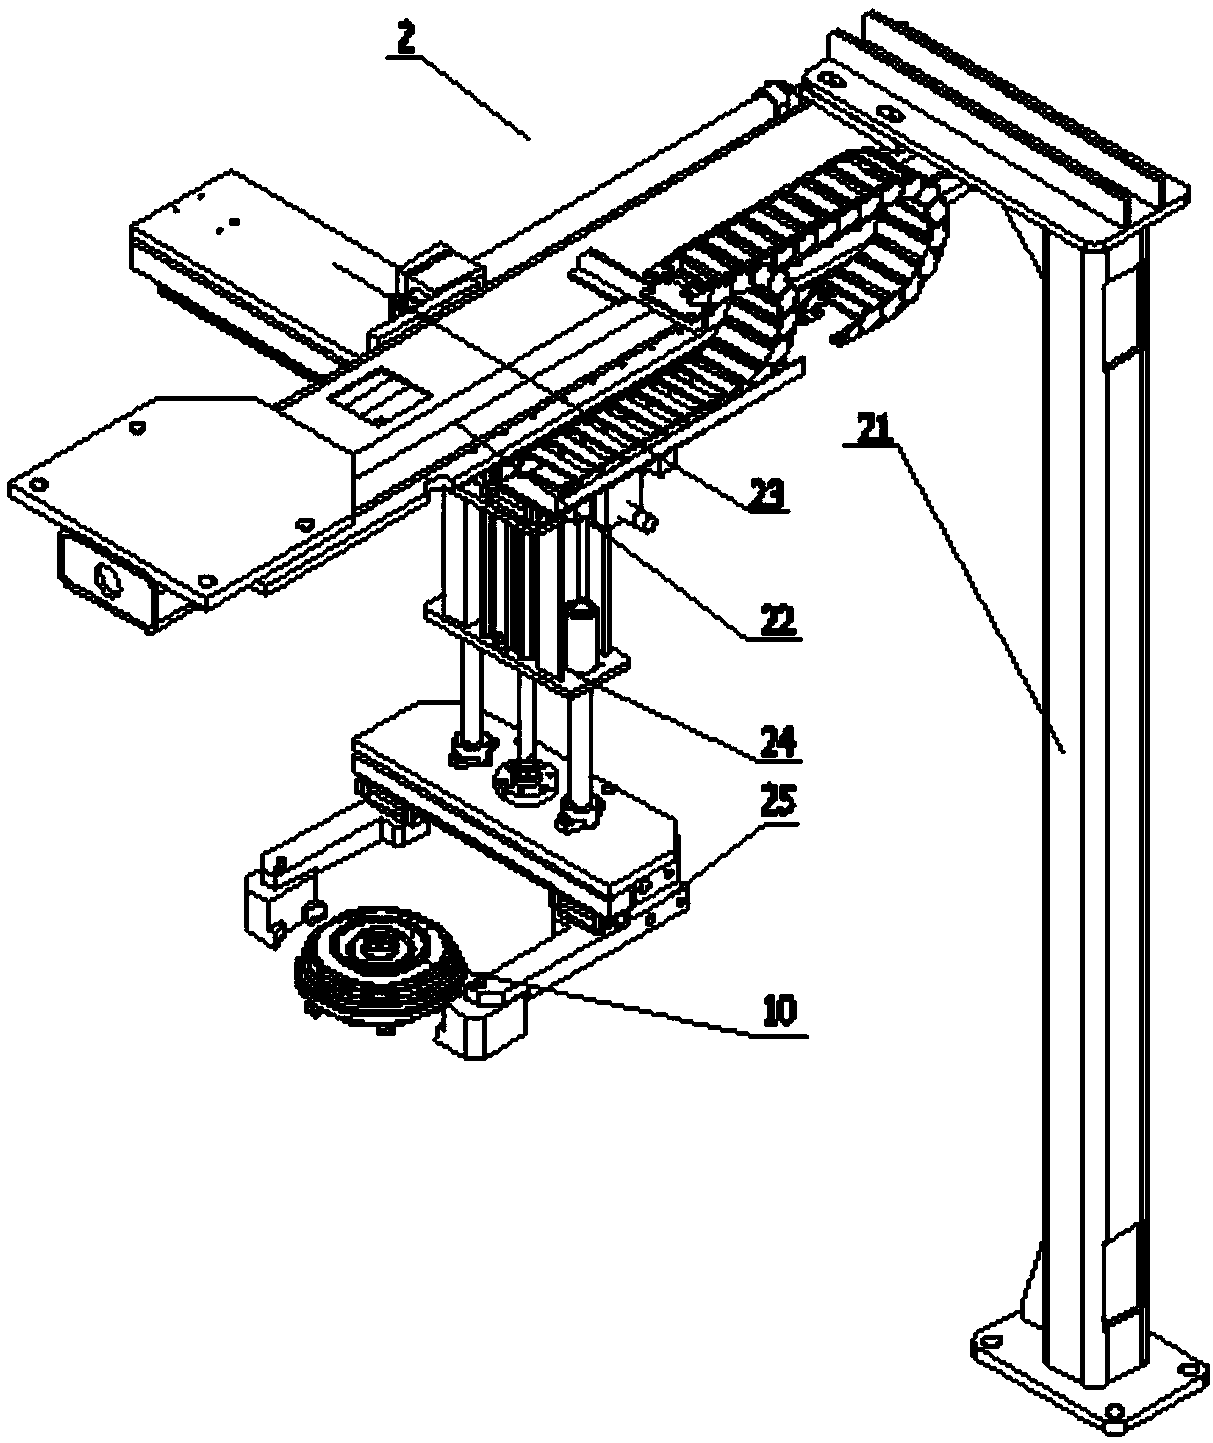 Hydraulic torque converter assembly welding equipment and welding method thereof